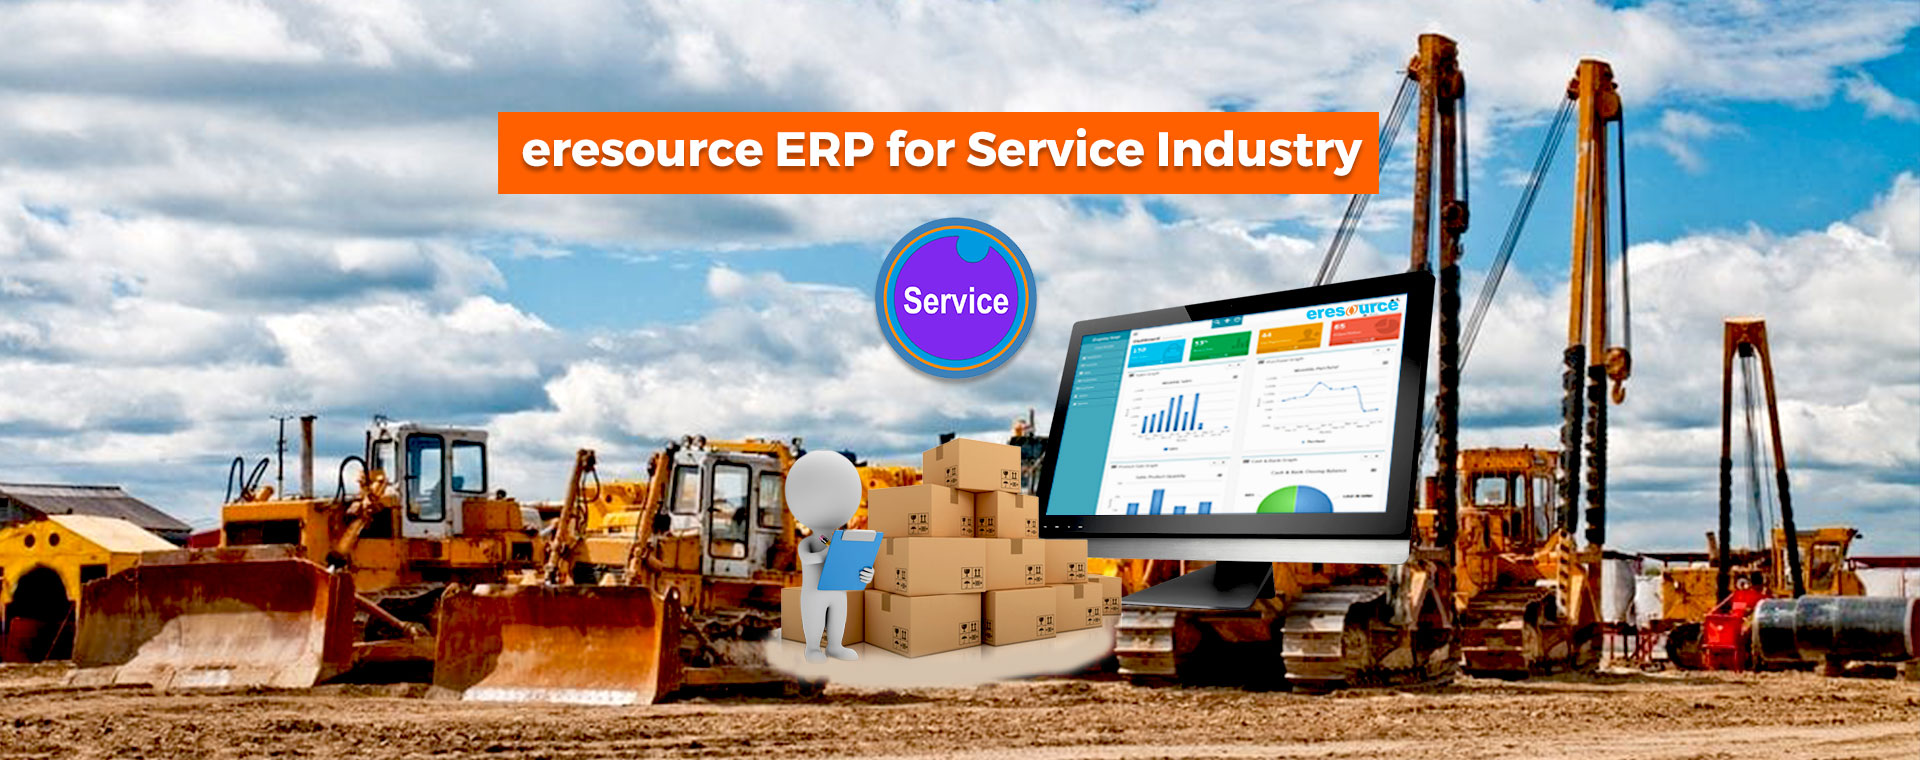 ERP for Service Industry